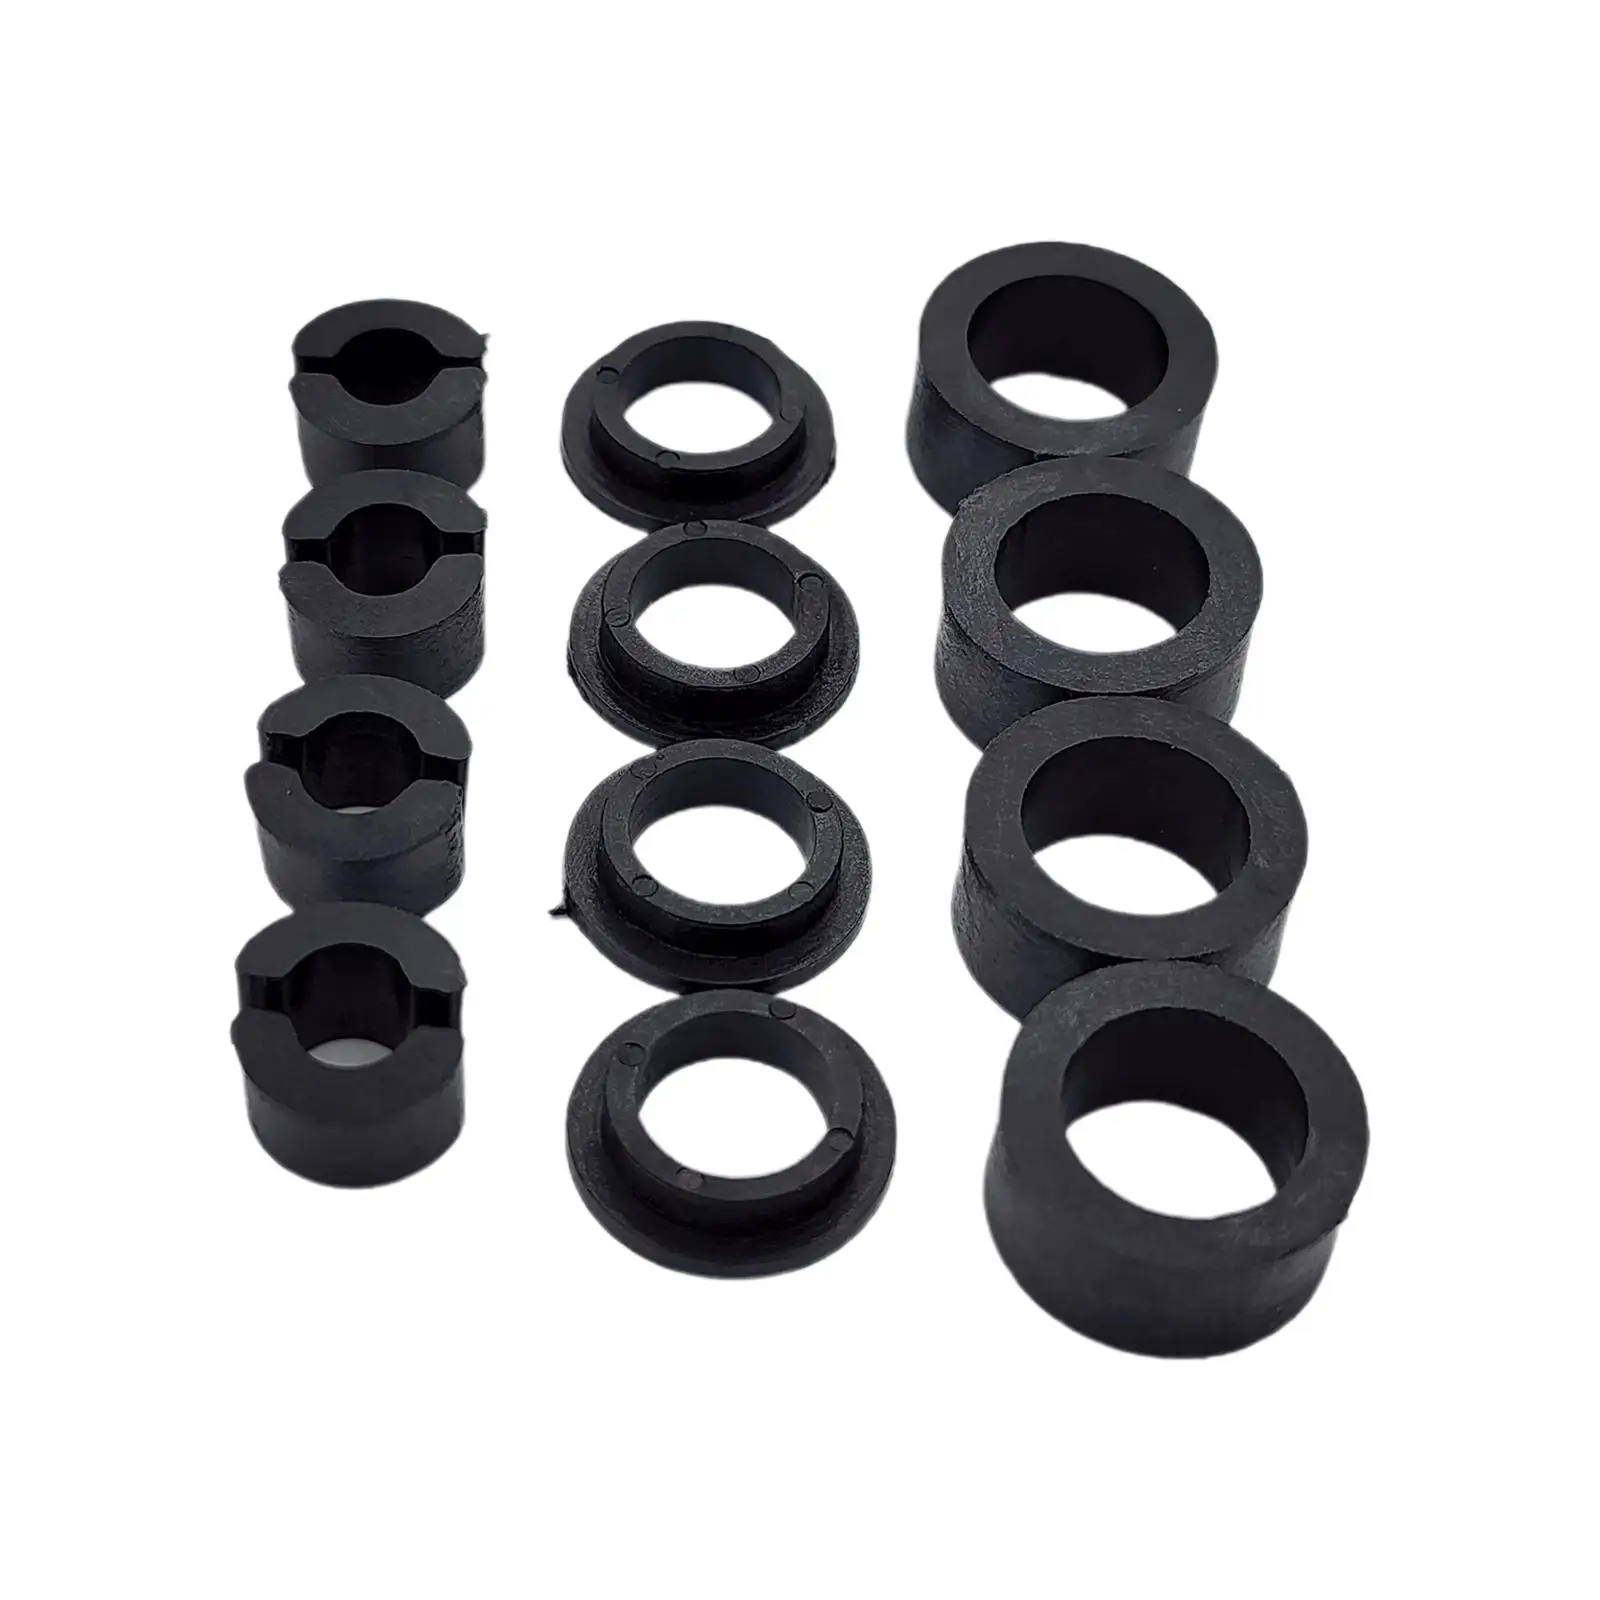 Front Seat Support Mount Bushing, Wobbly Loose Seat Fix for TJ Lj Unlimited Direct Replaces Auto Supplies Accessories